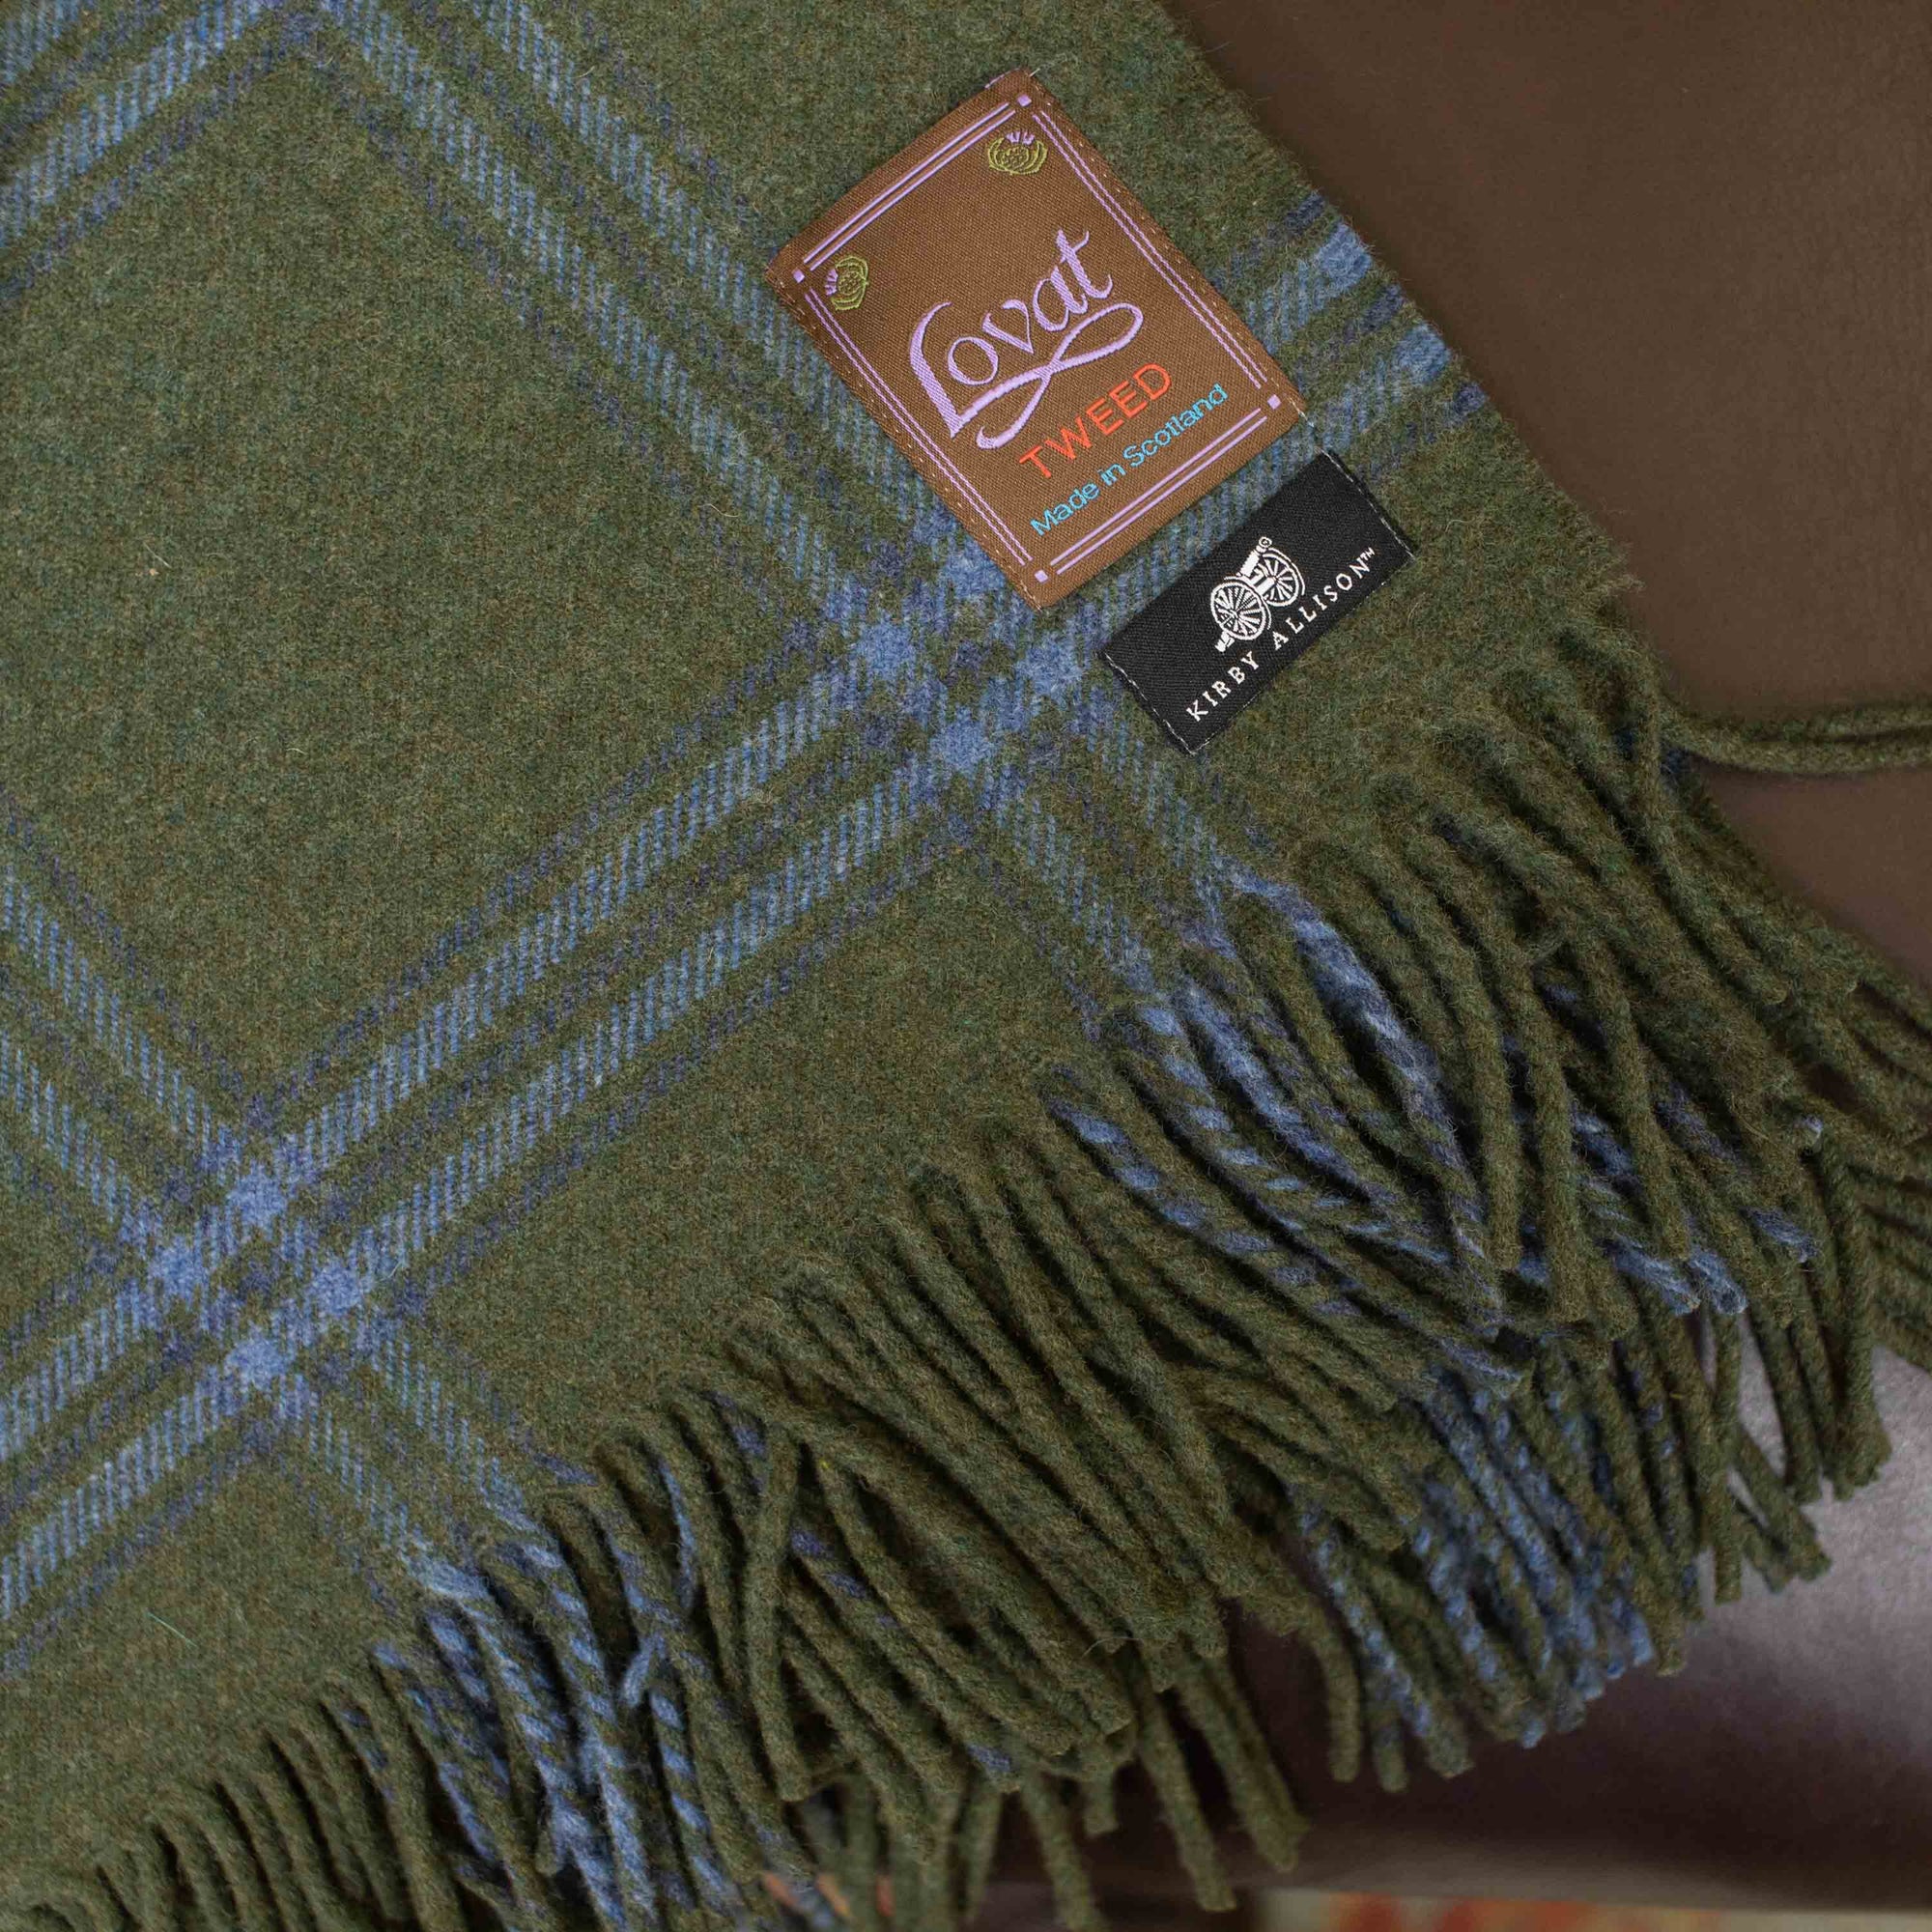 A Lovat Mill Kirby Allison Suit to Shoot Tweed Wool Throw on a leather couch.